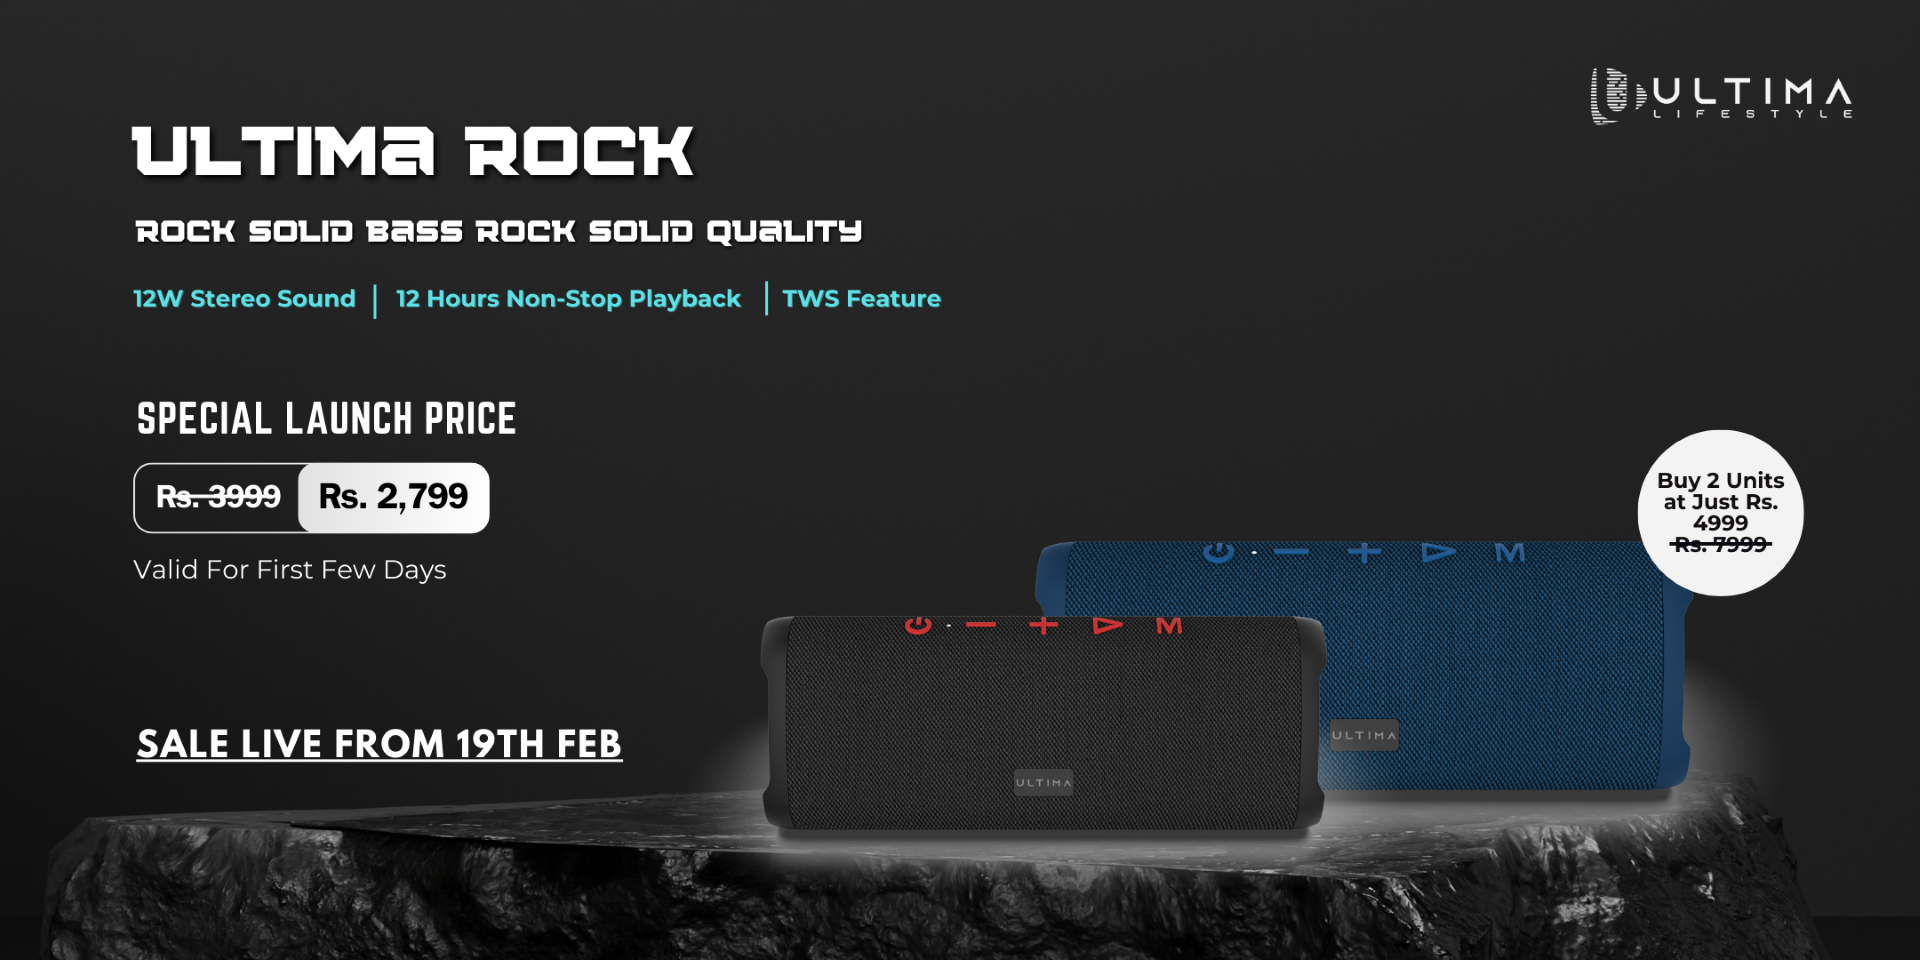 Ultima Rock Bluetooth Speaker Sold 2000 Units on Its Launch Day